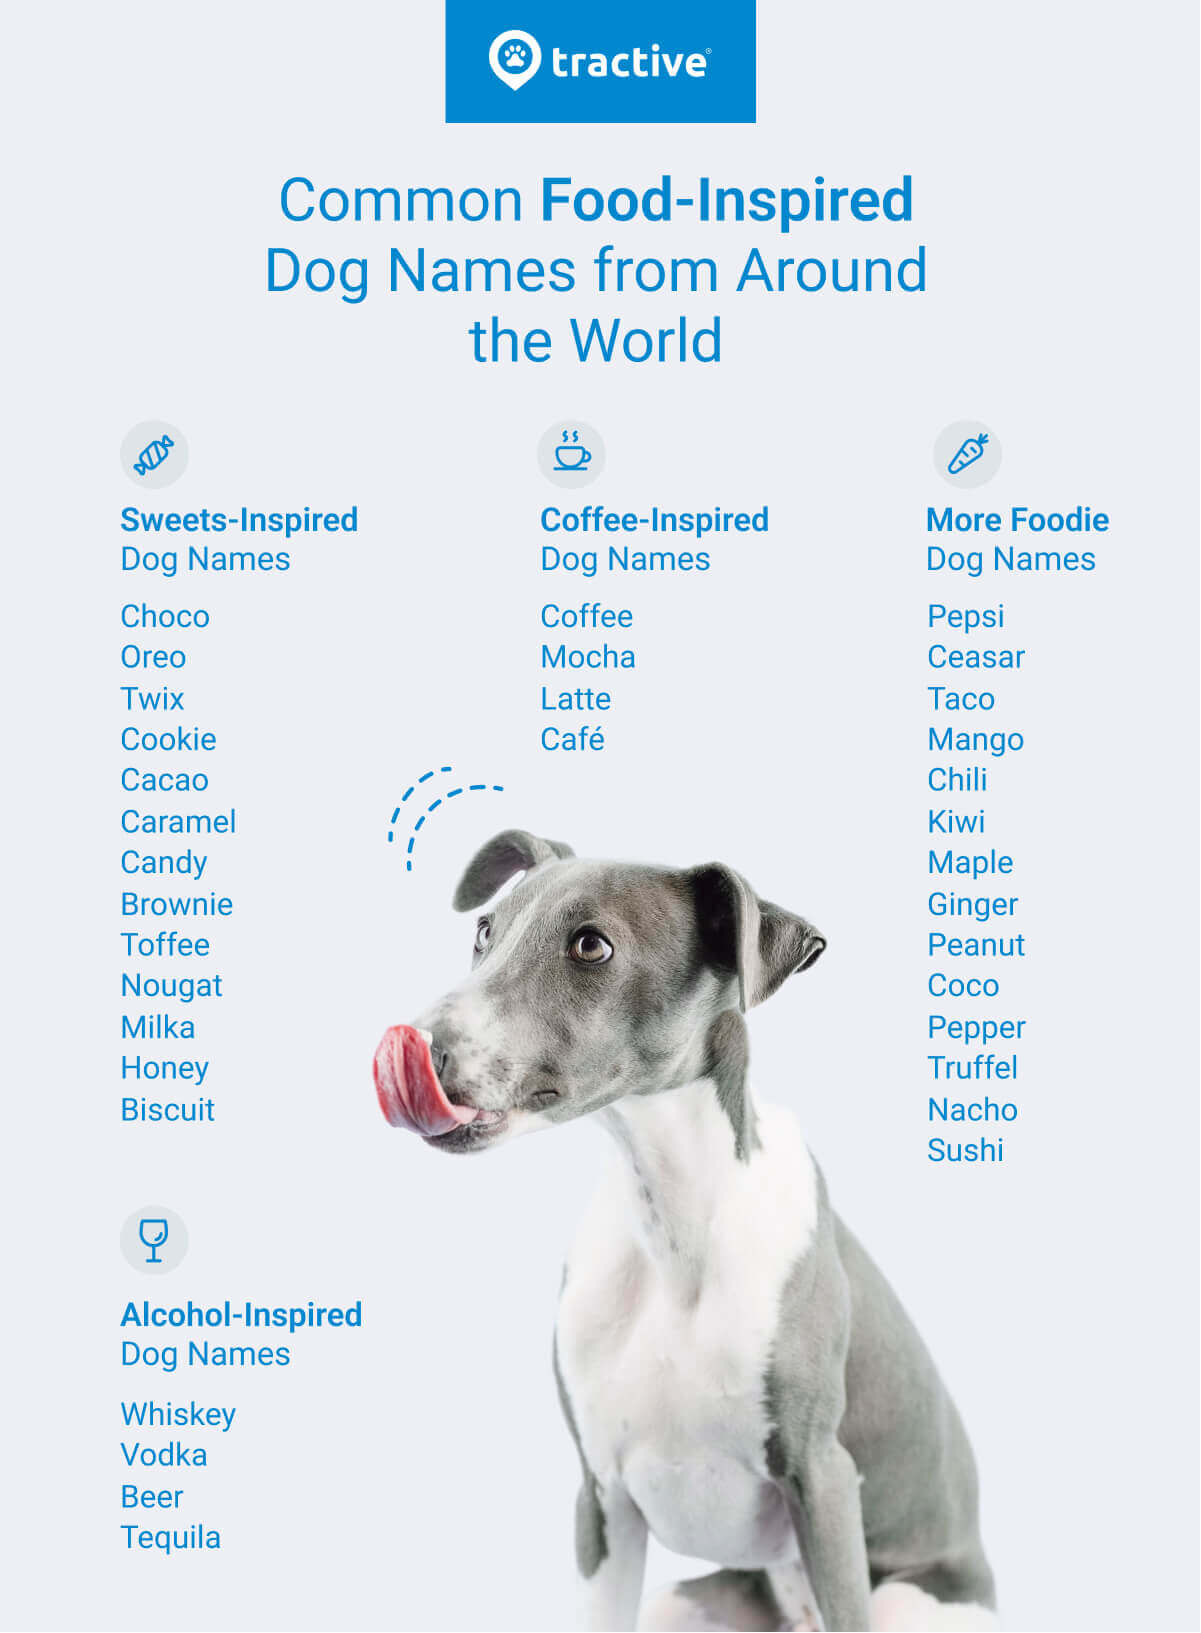 list of food inspired dog names from around the world - info graphic from tractive